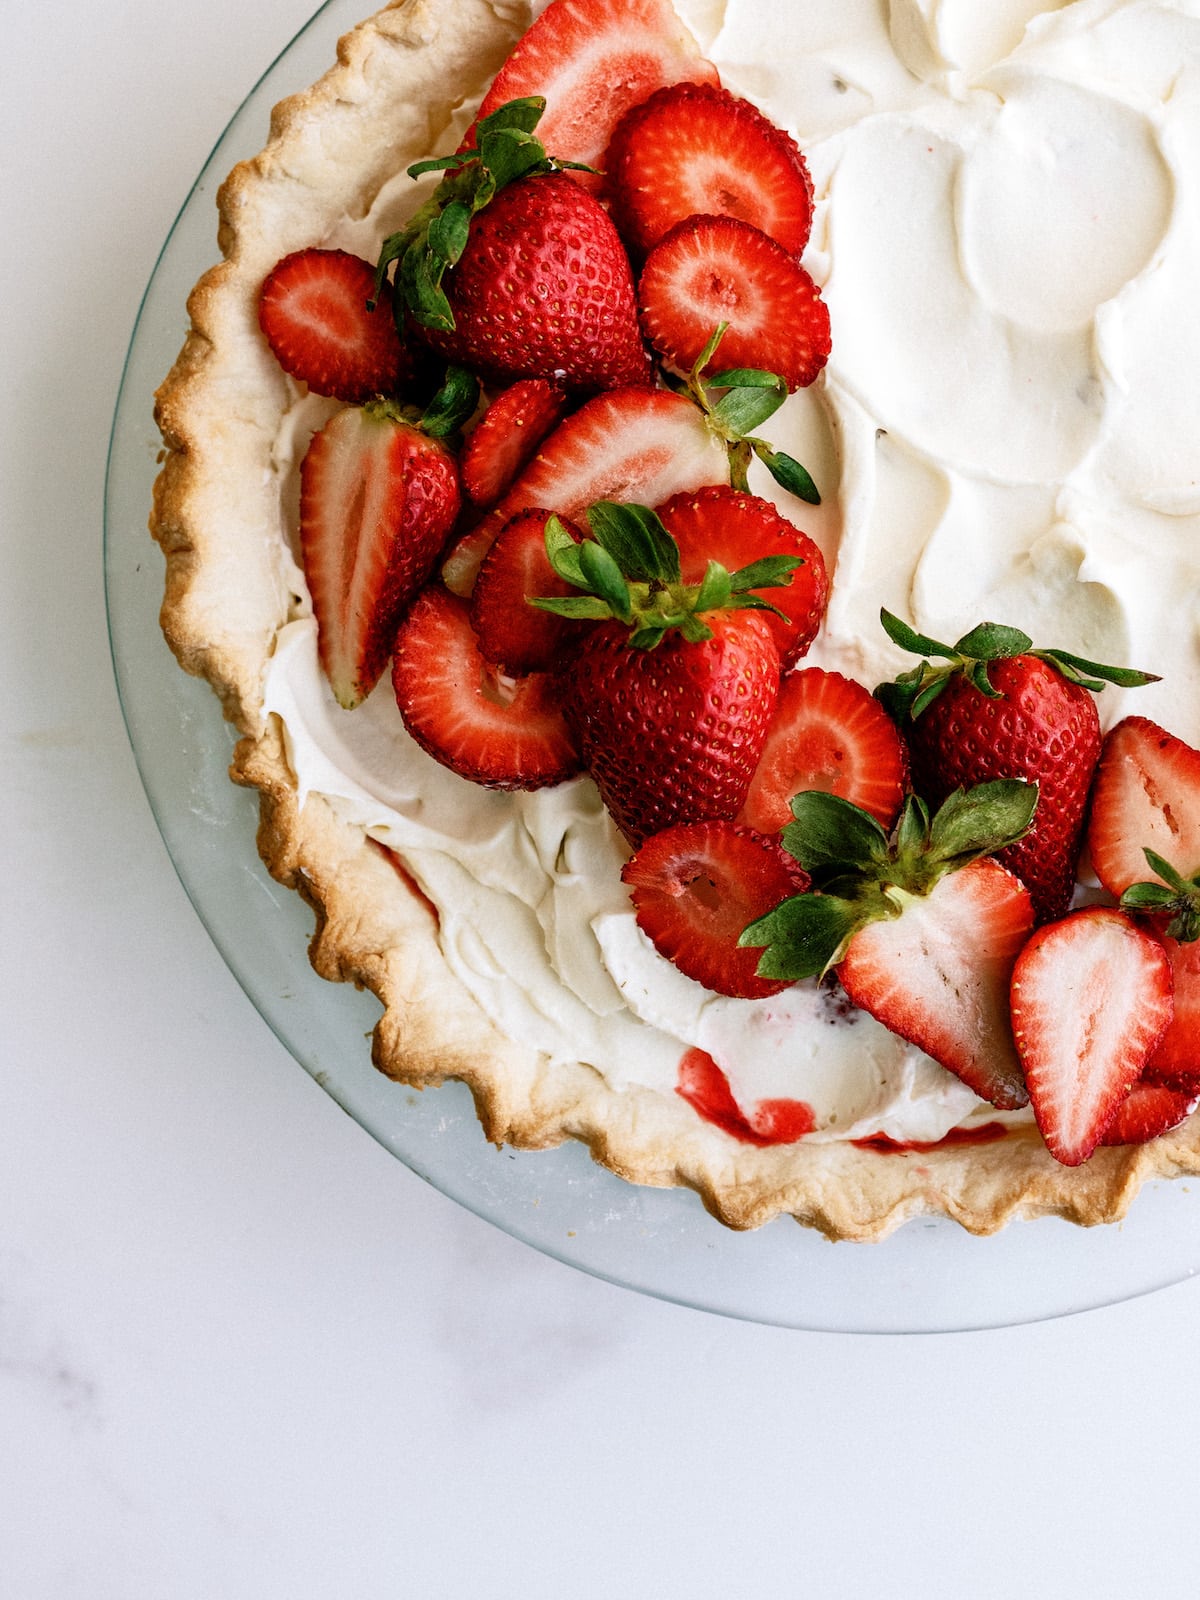 strawberry pie with jello and whipped cream on top